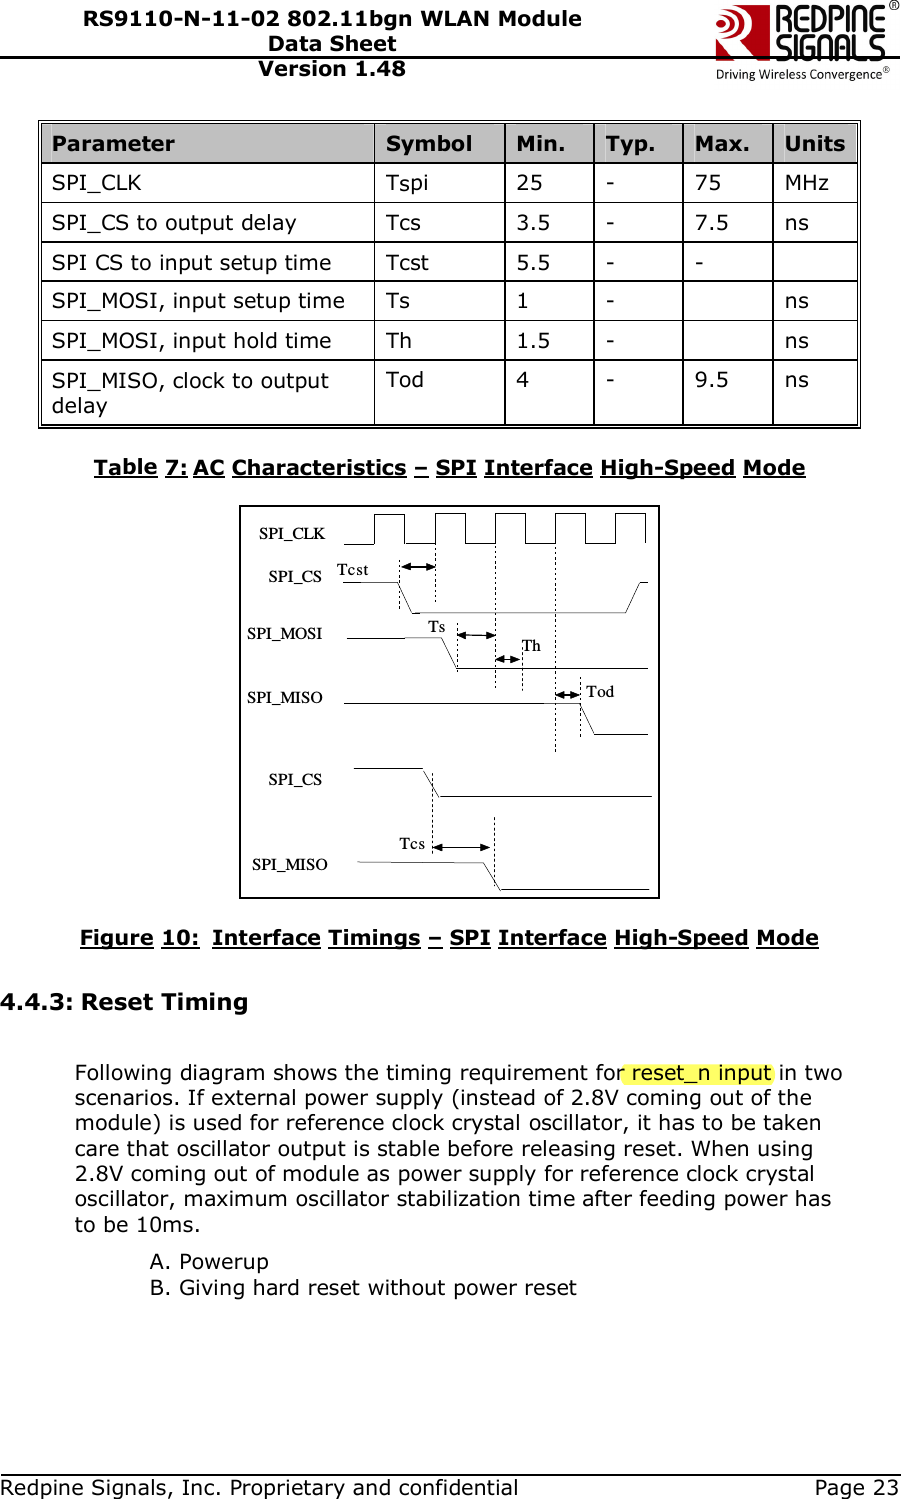   Redpine Signals, Inc. Proprietary and confidential  Page 23 RS9110-N-11-02 802.11bgn WLAN Module Data Sheet Version 1.48 Parameter  Symbol  Min.  Typ.  Max.  Units SPI_CLK  Tspi  25  -  75  MHz SPI_CS to output delay  Tcs  3.5  -  7.5  ns SPI CS to input setup time  Tcst  5.5  -  -   SPI_MOSI, input setup time   Ts  1  -    ns SPI_MOSI, input hold time  Th  1.5  -    ns SPI_MISO, clock to output delay Tod  4  -  9.5  ns  Table 7: AC Characteristics – SPI Interface High-Speed Mode  SPI_CLKSPI_CSSPI_MOSISPI_MISOTsTodThTcstTcsSPI_CSSPI_MISO  Figure 10:  Interface Timings – SPI Interface High-Speed Mode  4.4.3: Reset Timing  Following diagram shows the timing requirement for reset_n input in two scenarios. If external power supply (instead of 2.8V coming out of the module) is used for reference clock crystal oscillator, it has to be taken care that oscillator output is stable before releasing reset. When using 2.8V coming out of module as power supply for reference clock crystal oscillator, maximum oscillator stabilization time after feeding power has to be 10ms. A. Powerup B. Giving hard reset without power reset  